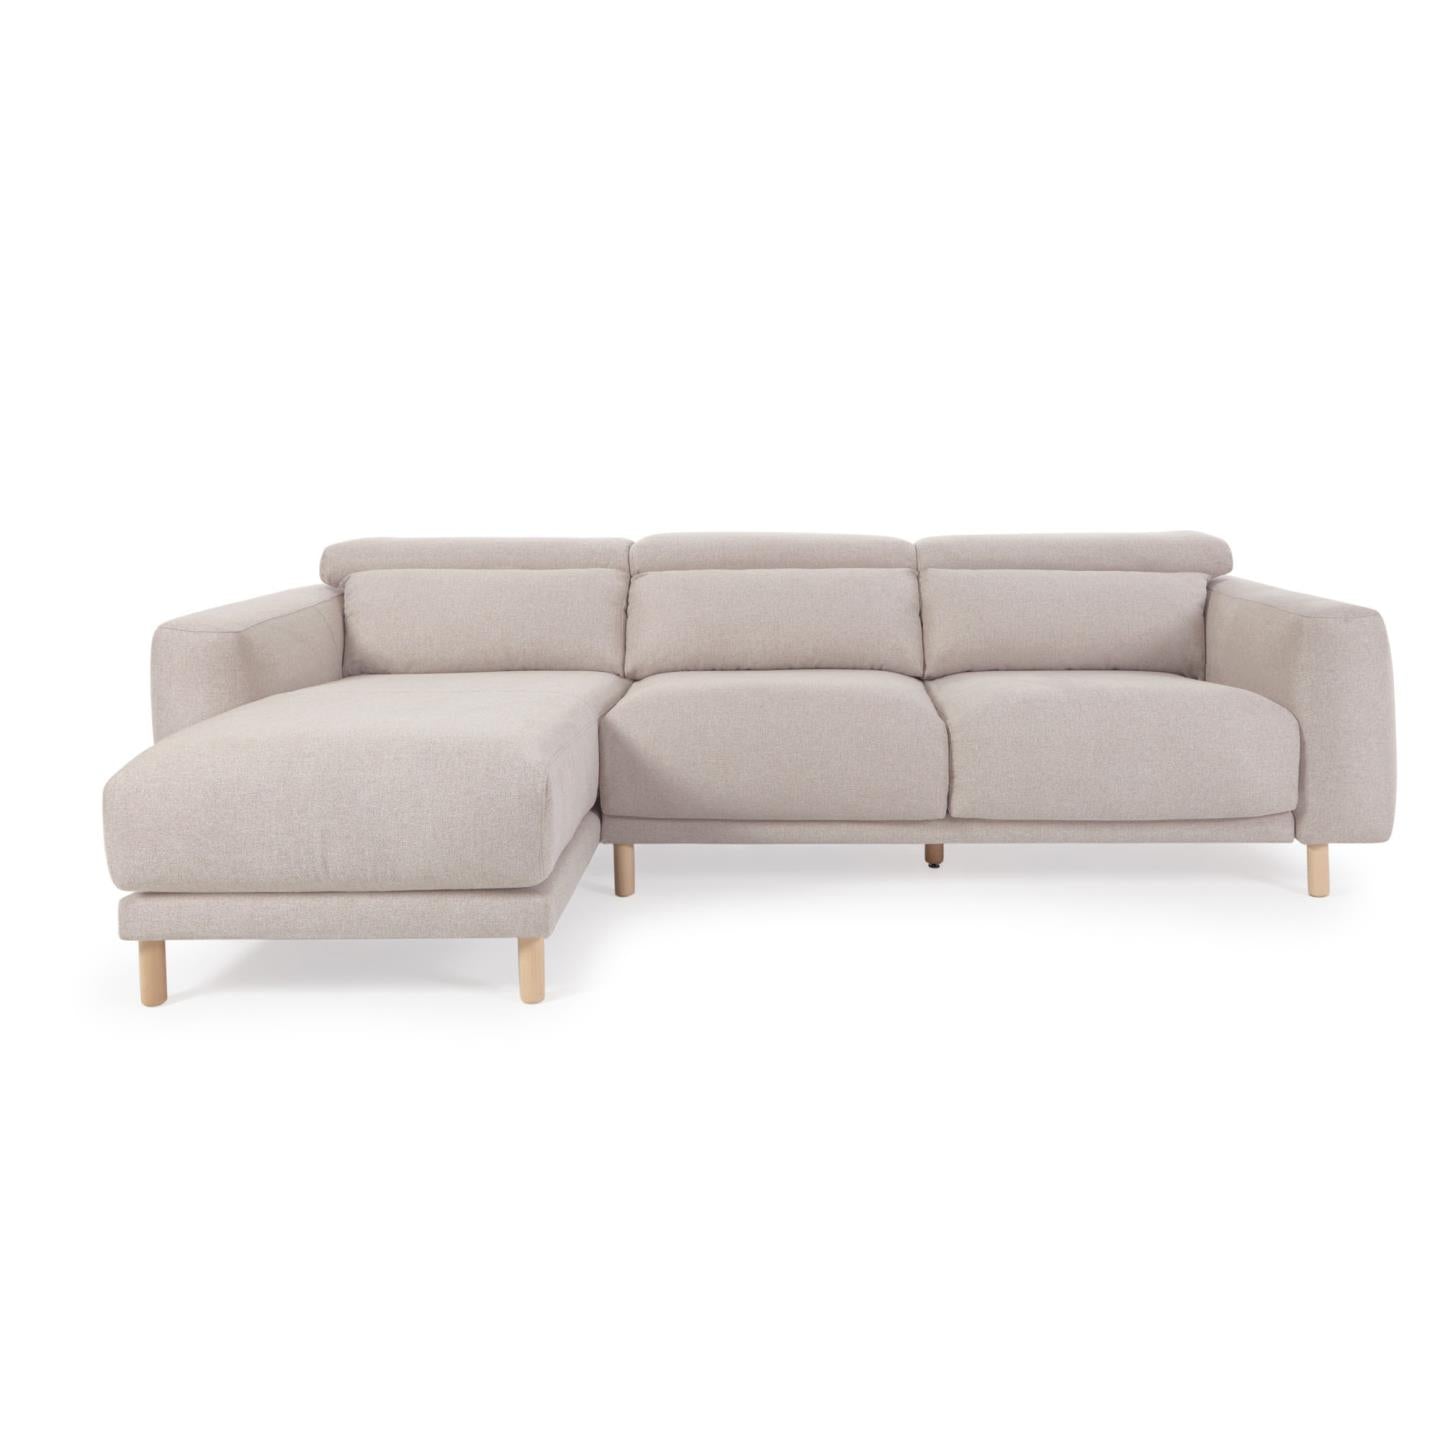 Singa 3 seater sofa with left-hand chaise longue in beige, 296 cm